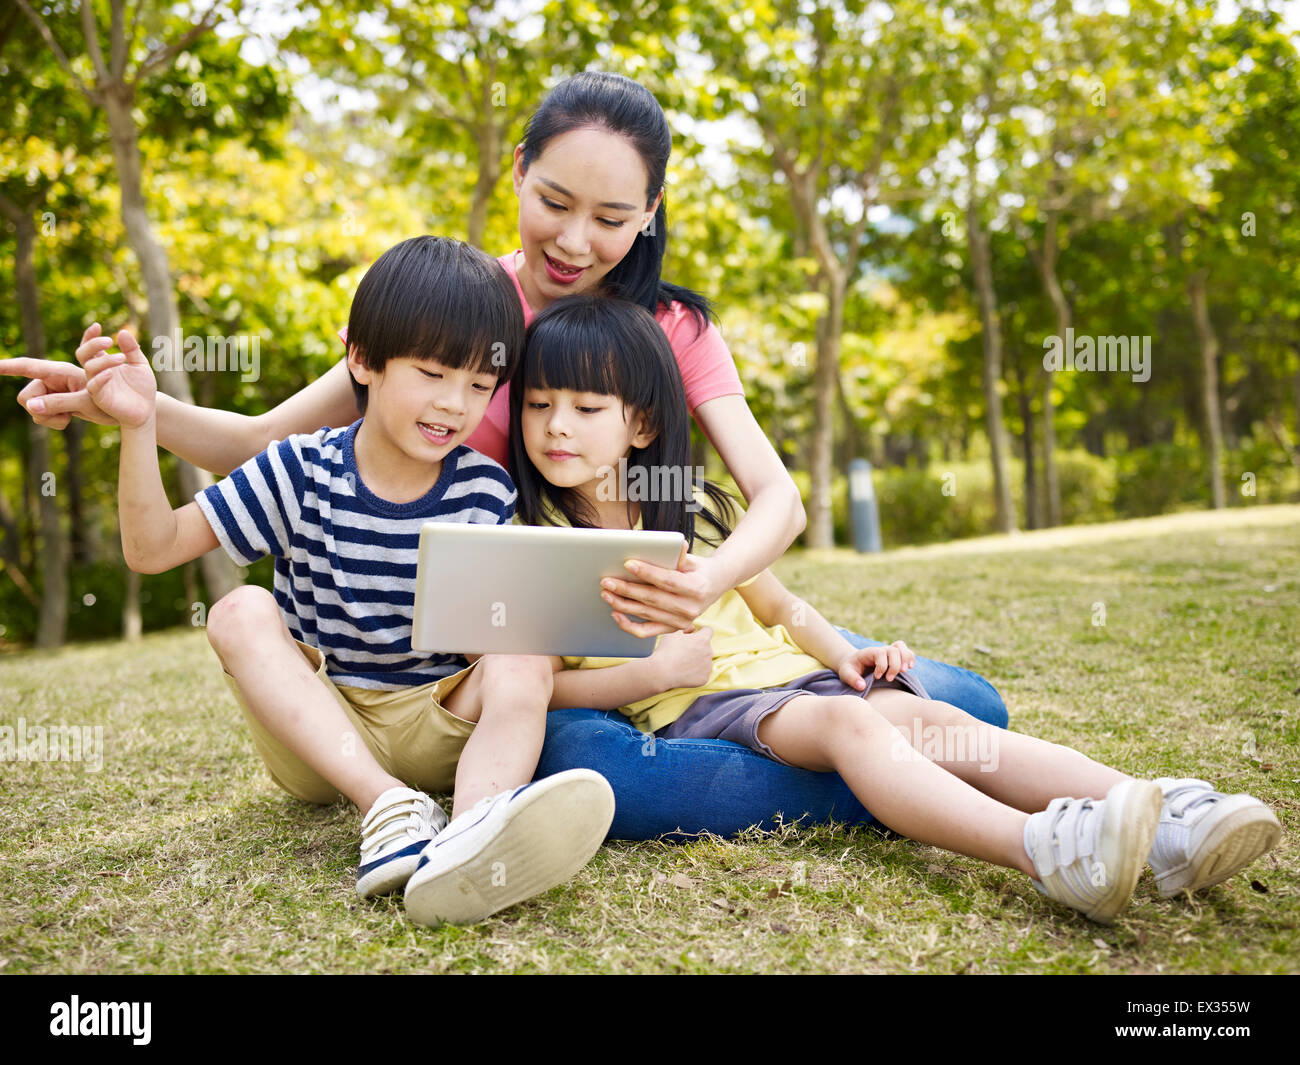 asian mother and children using ipad outdoors. Stock Photo